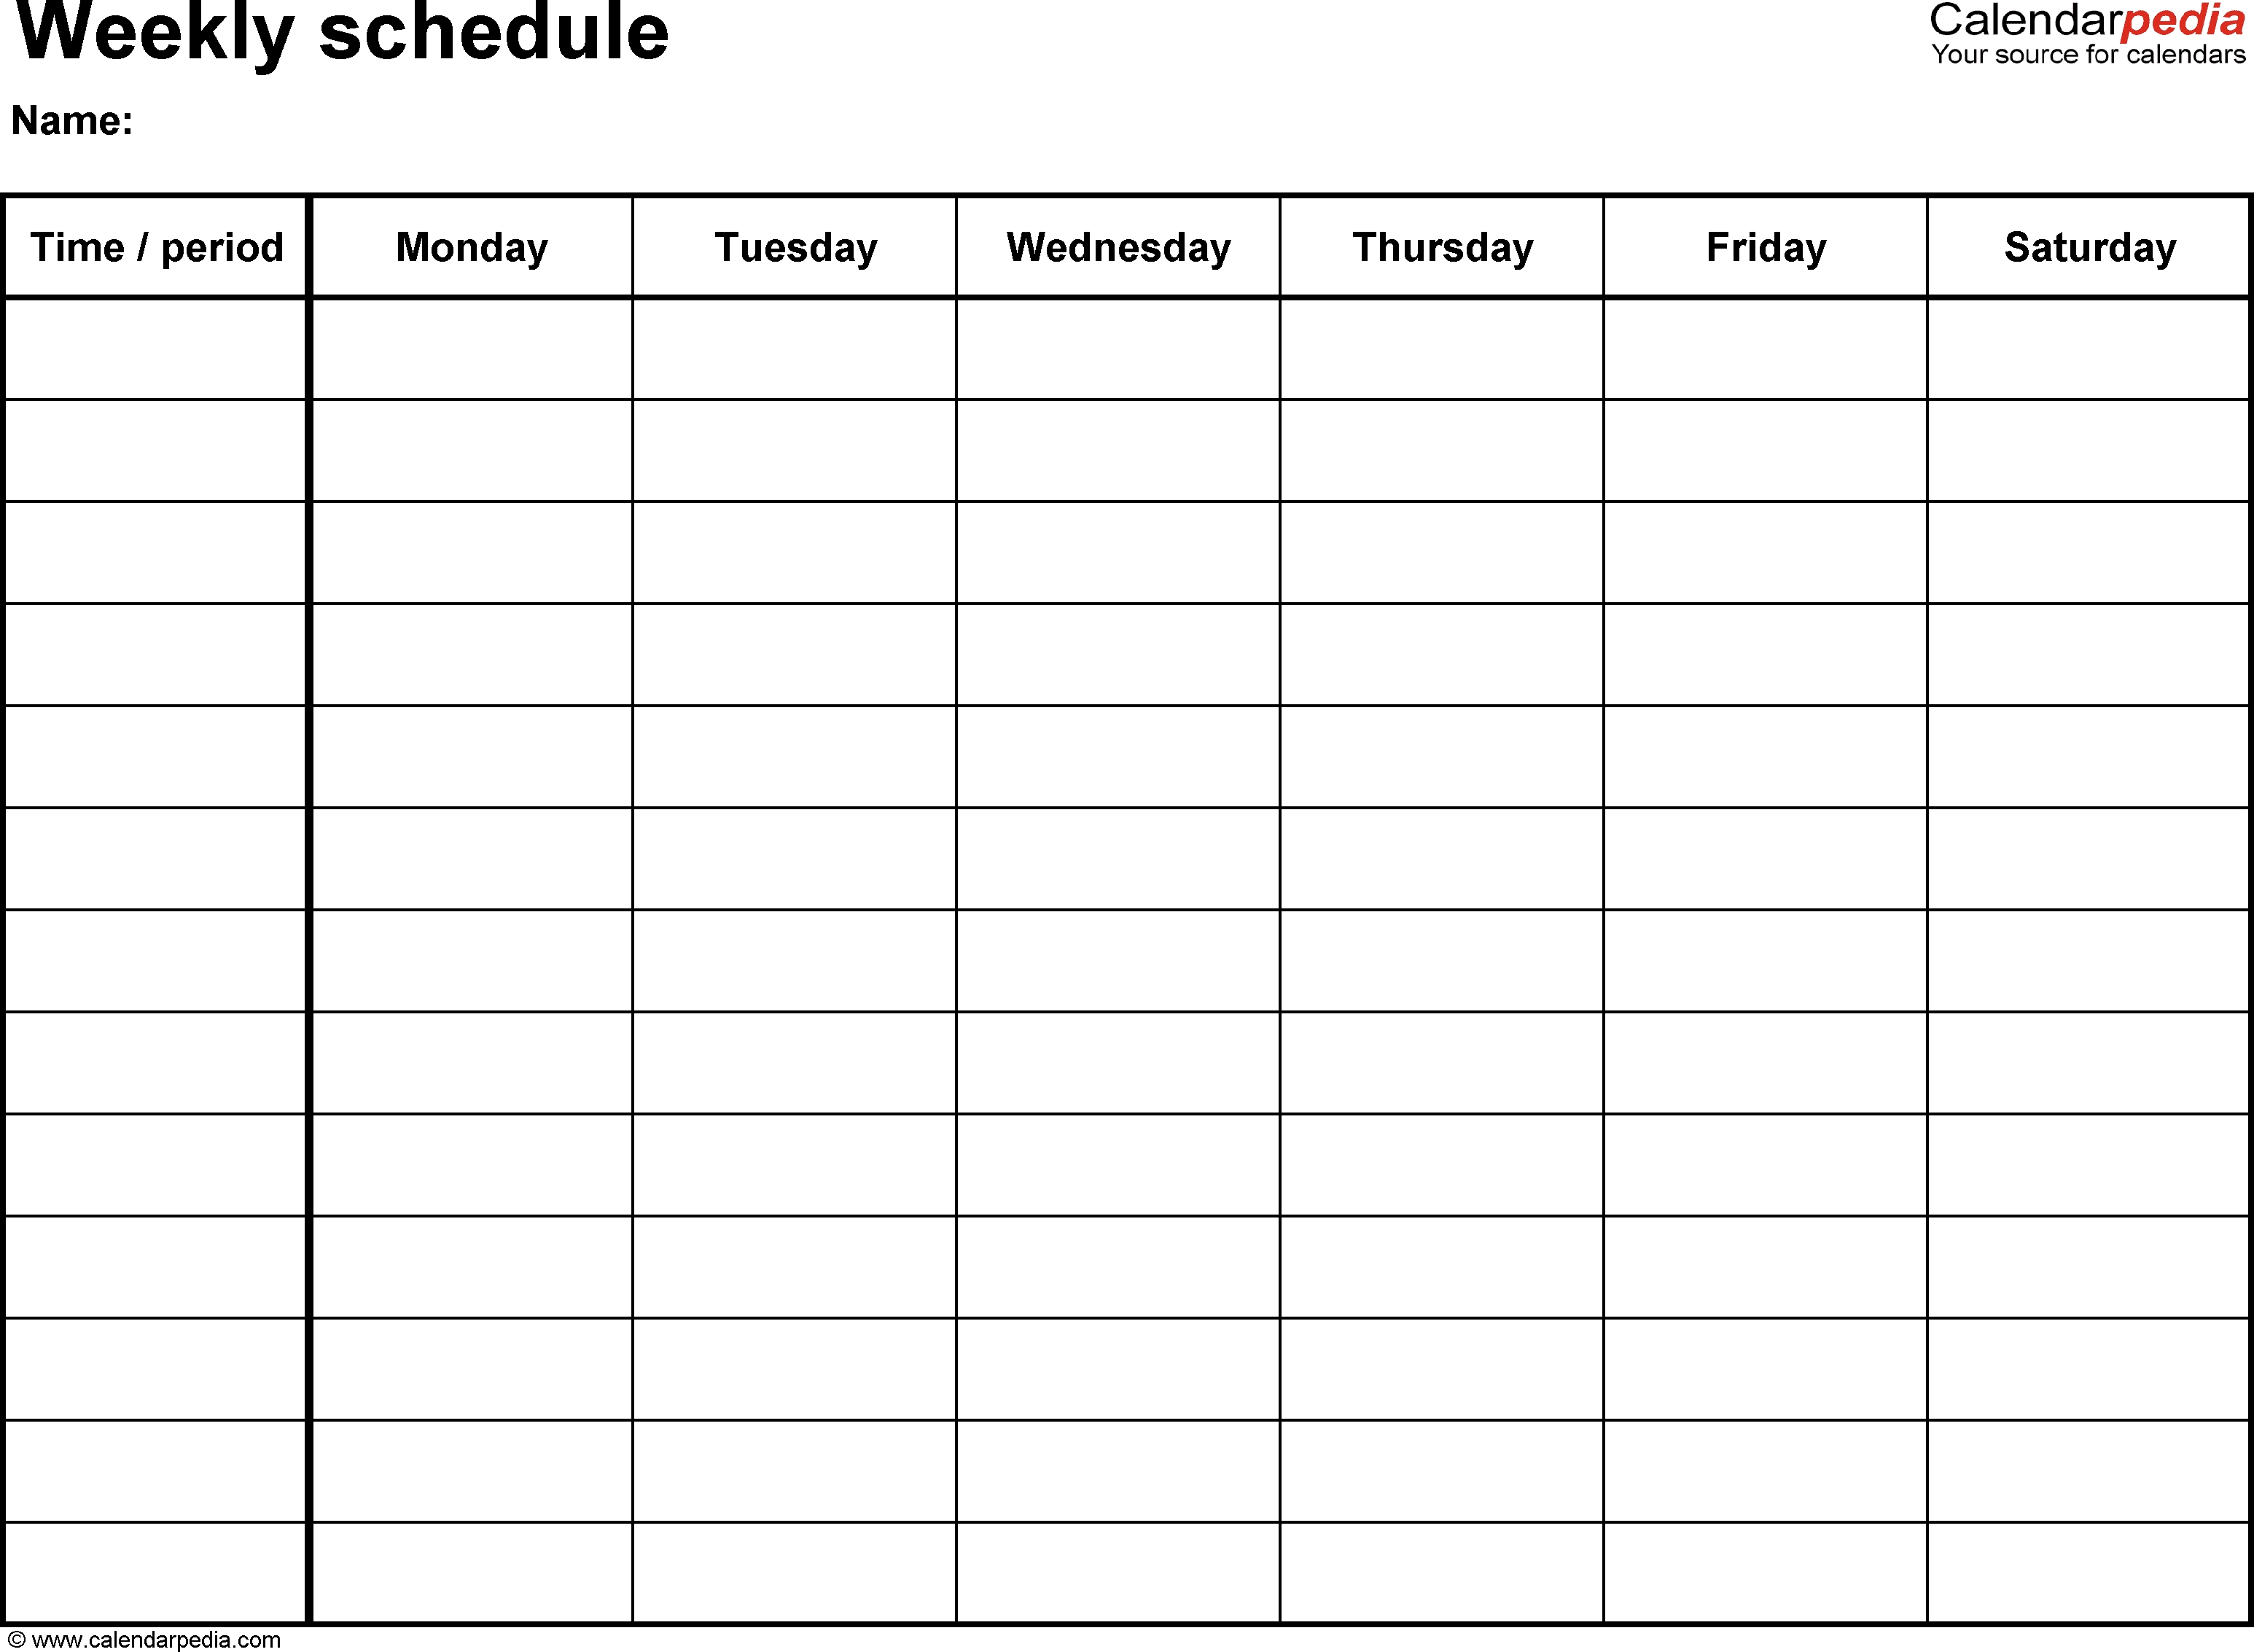 Free Weekly Schedule Templates For Pdf - 18 Templates within Printable Appointment Calendars Monday Through Friday